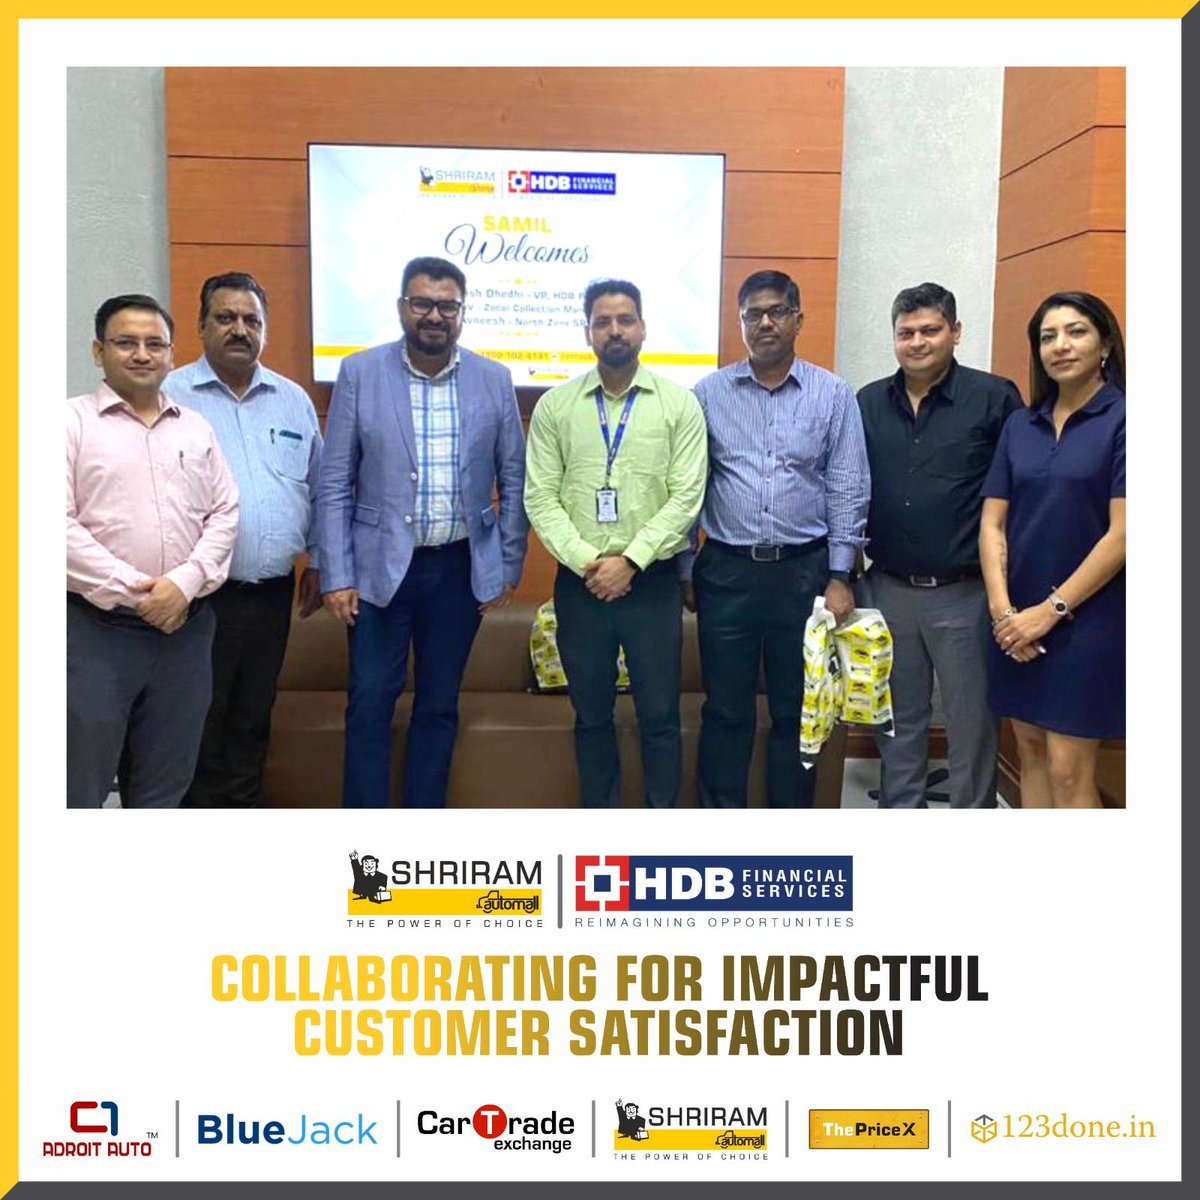 SAMIL is pleased to announce the collaboration with HDB Financial Services to enhance business relationships through physical auctions, parking expansion, and streamlined documentation services. 
#UsedVehicles #UsedEquipment #PhysicalAuction #Samil #ShriramAutomall #ProudSamilian